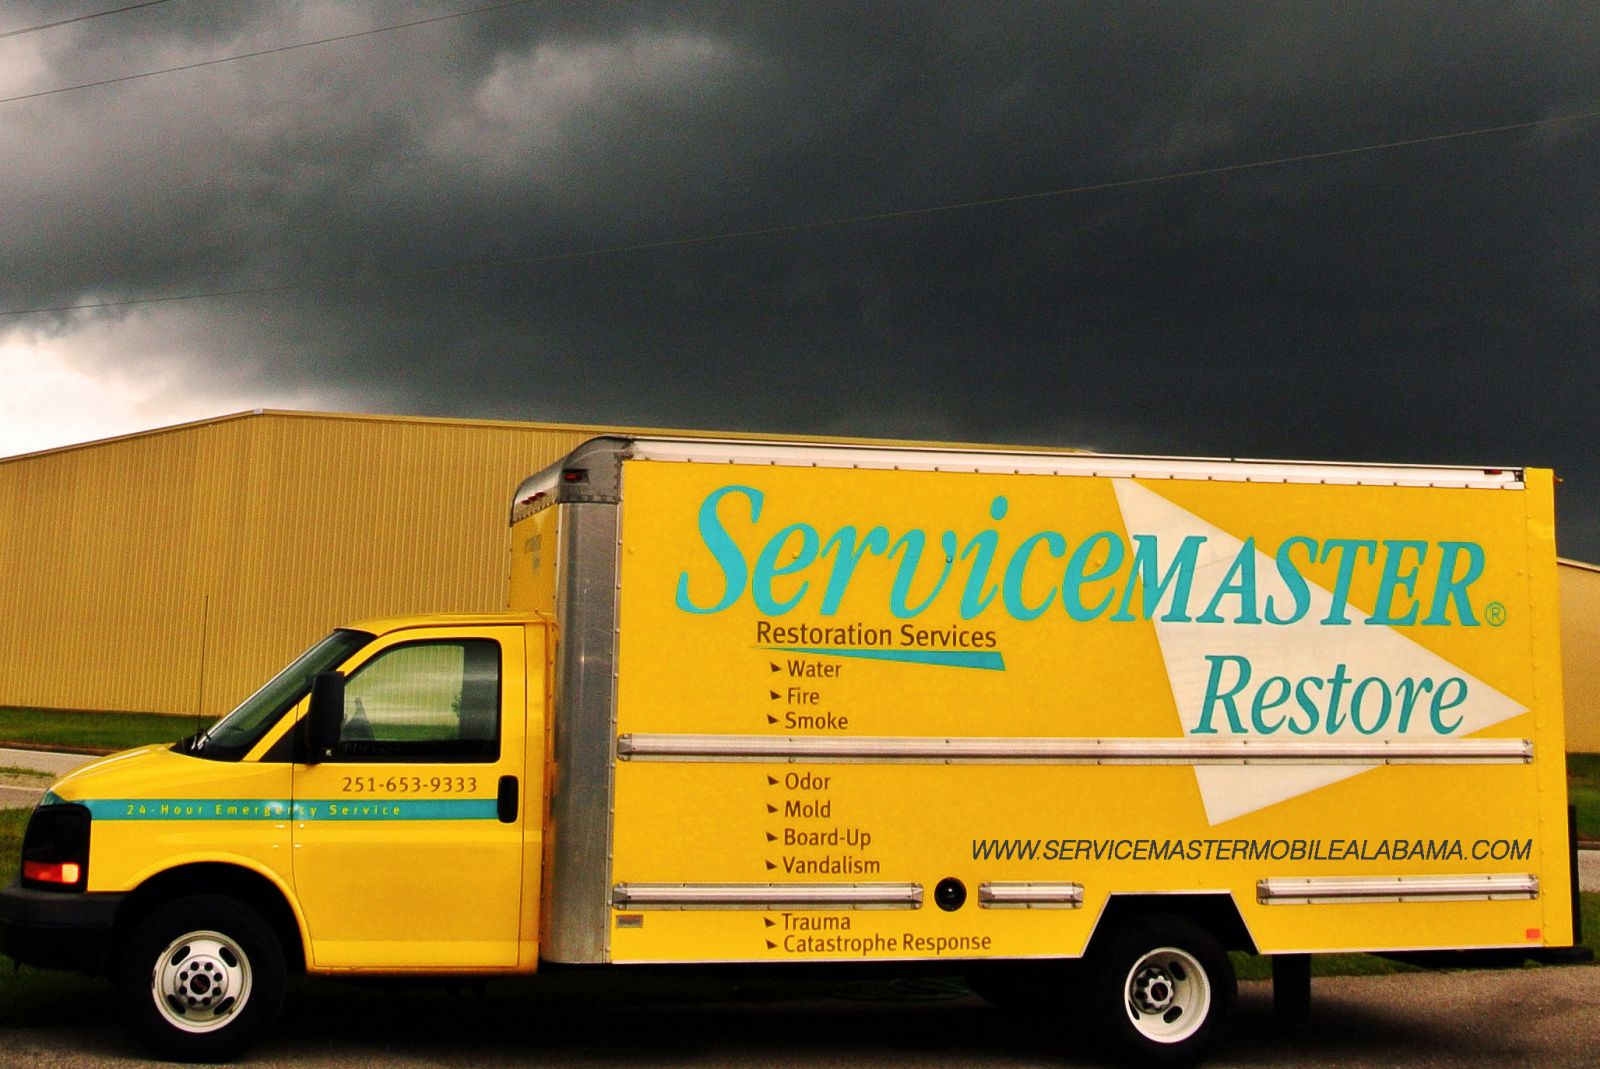 Yellow ServiceMaster Restore truck out during unfavorable weather